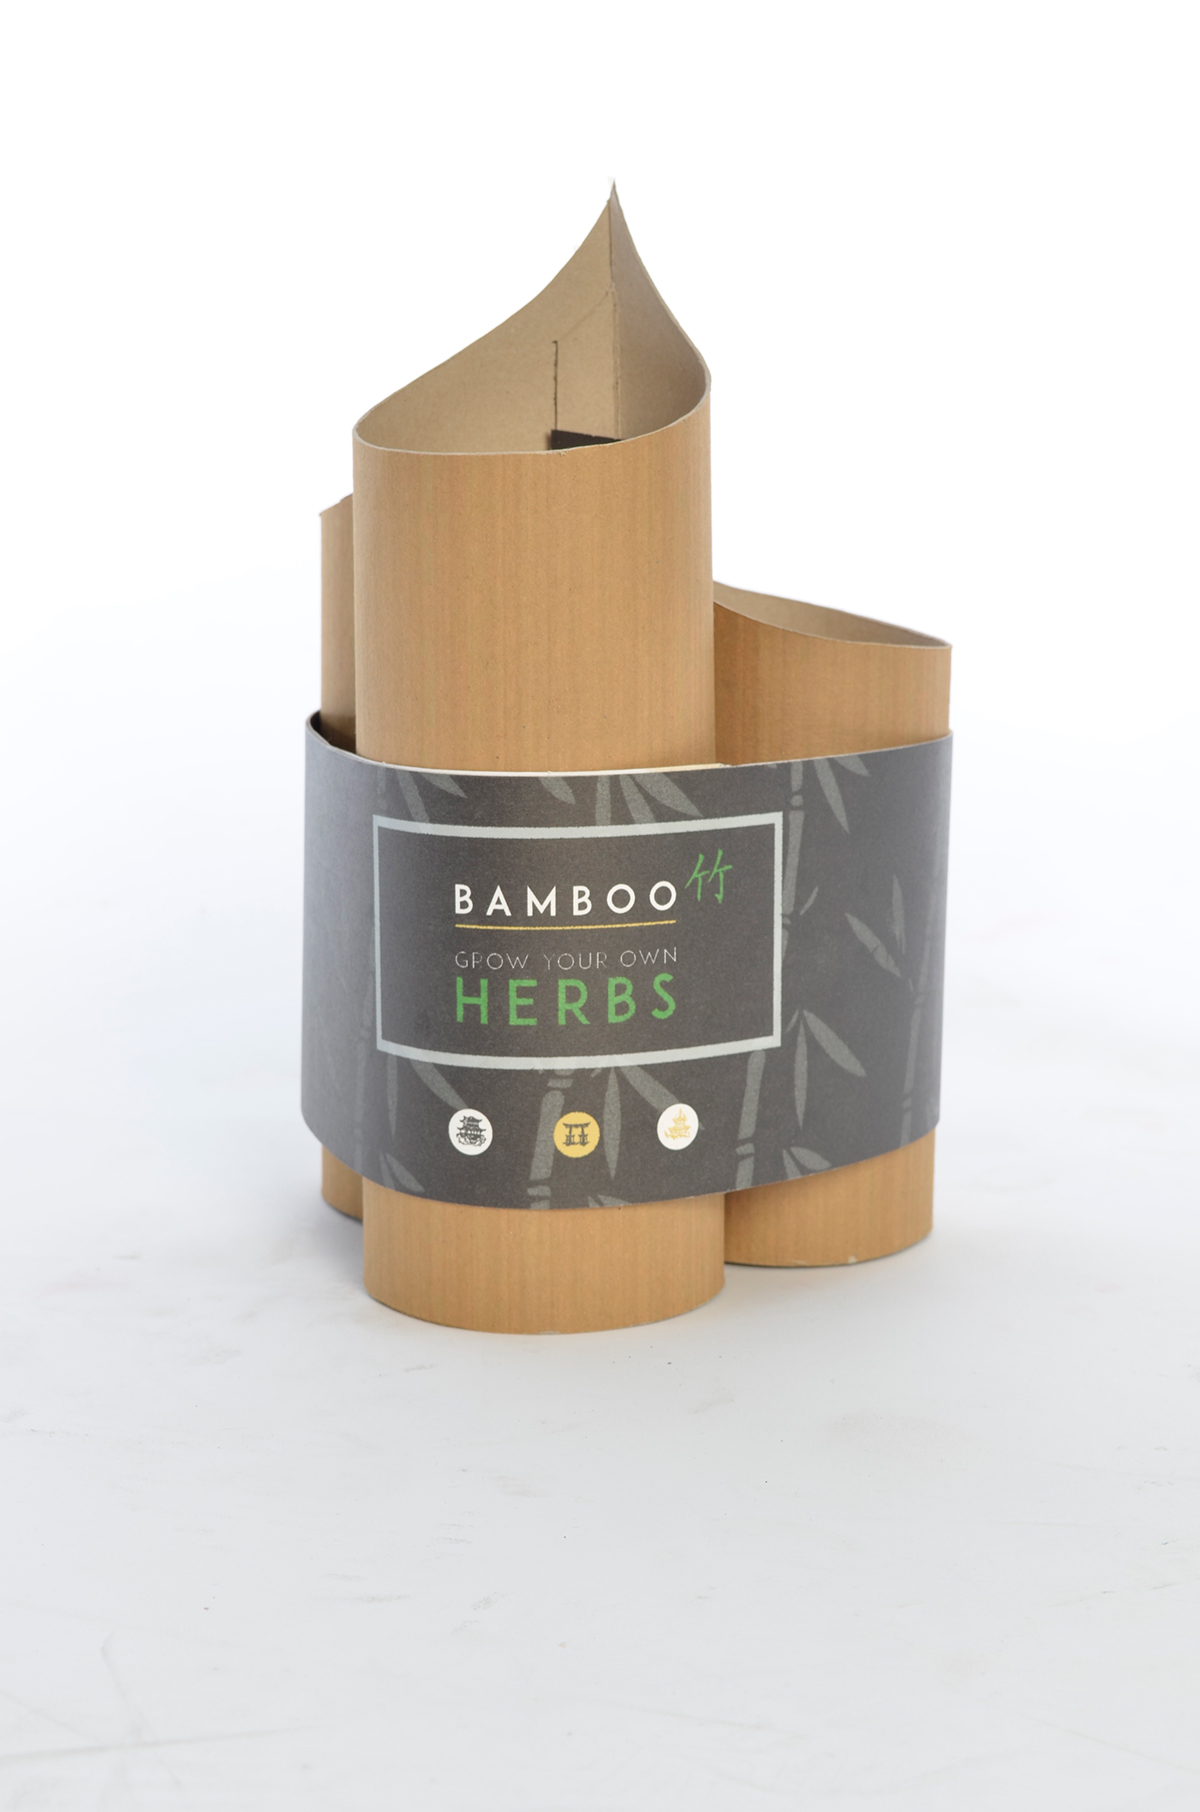 Adobe Portfolio logo logos chinese Style packaging design product bamboo grow your own herbs design